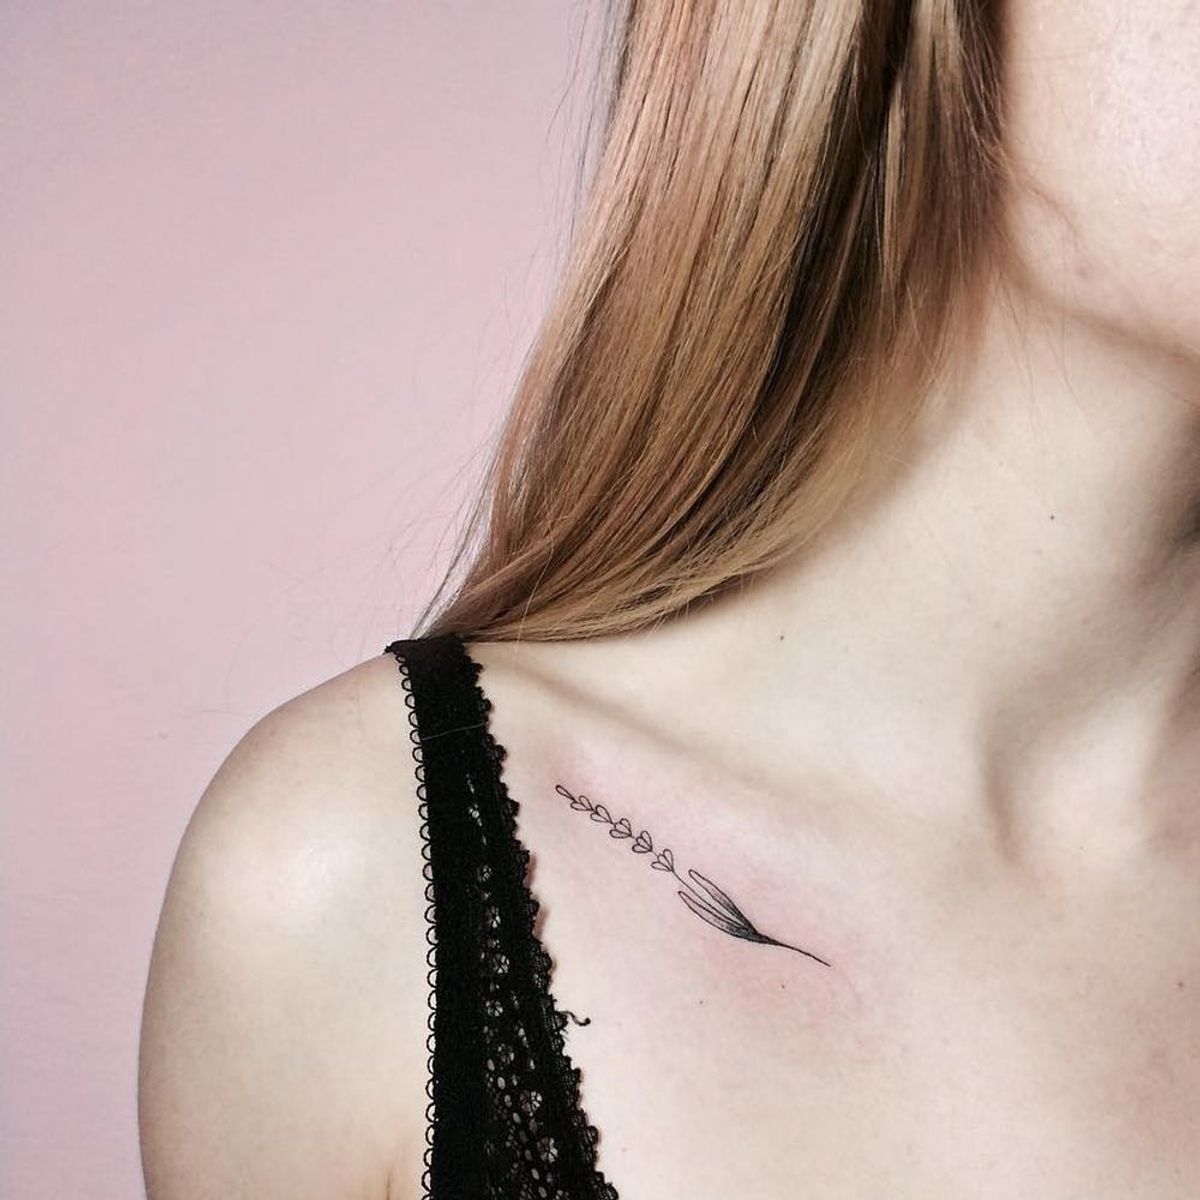 12 of the Cutest Tiny Tattoos Perfect for First-Timers in 2018